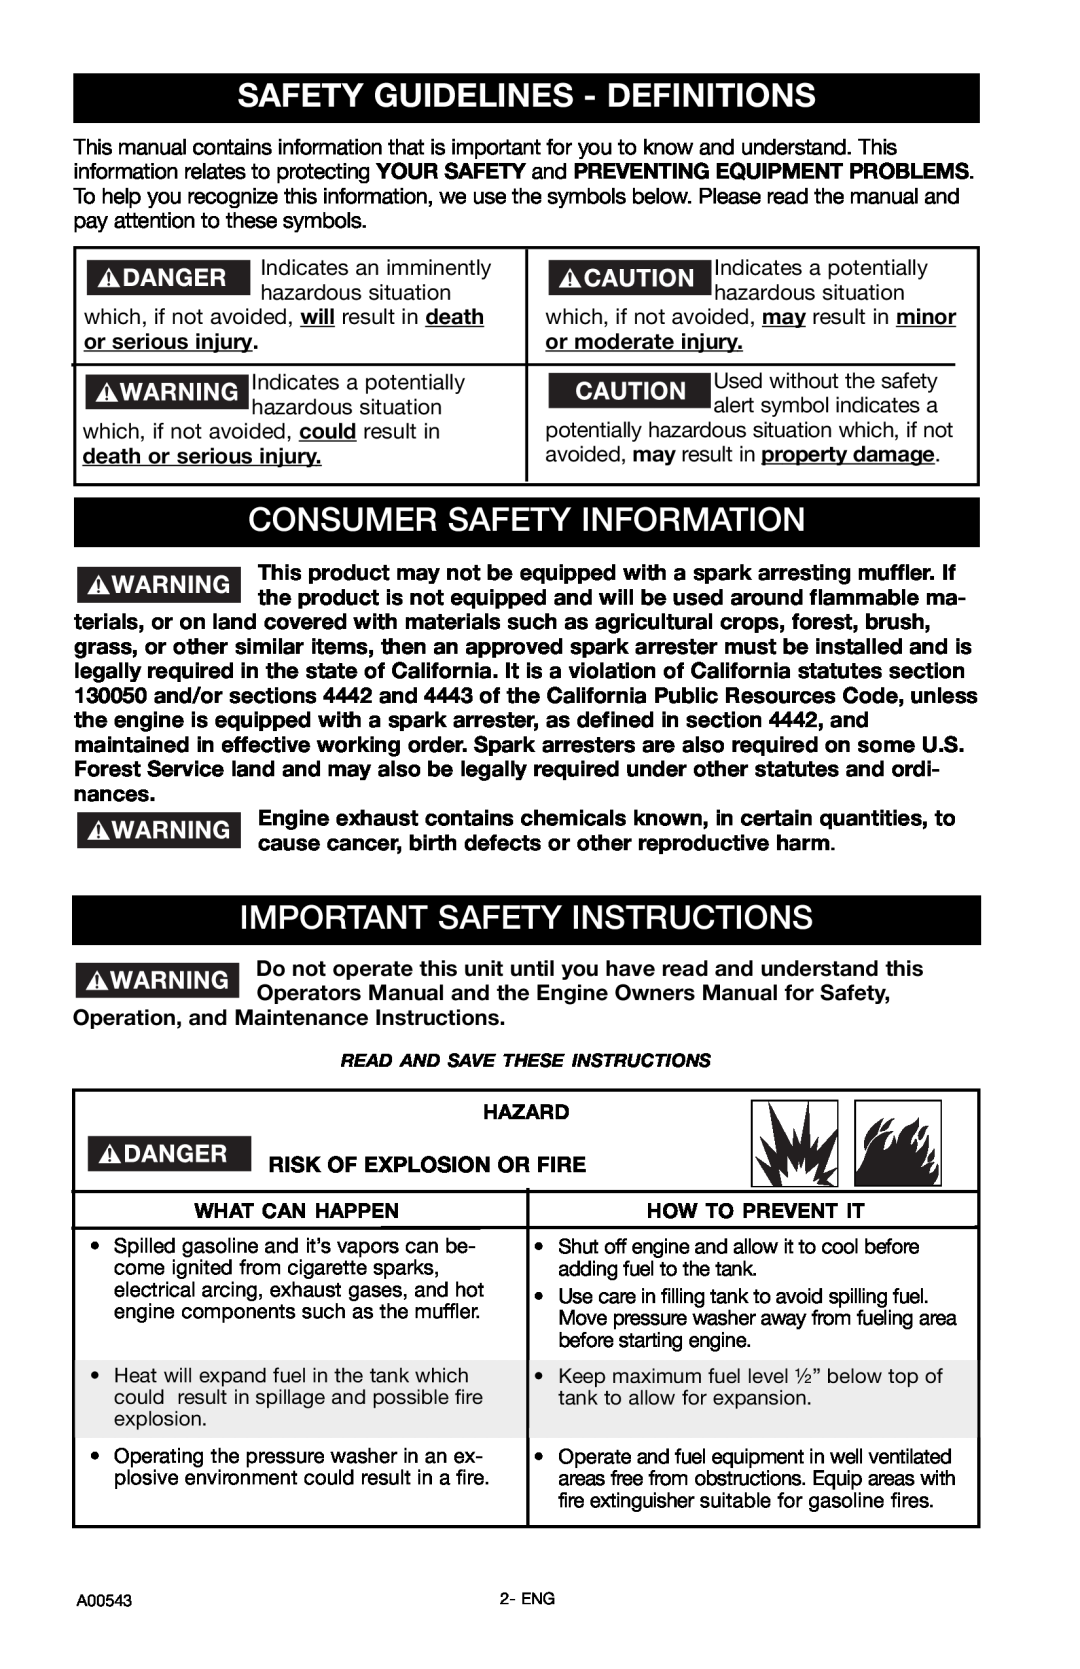 Delta A00543, DTH3635 Safety Guidelines - Definitions, Consumer Safety Information, Important Safety Instructions 